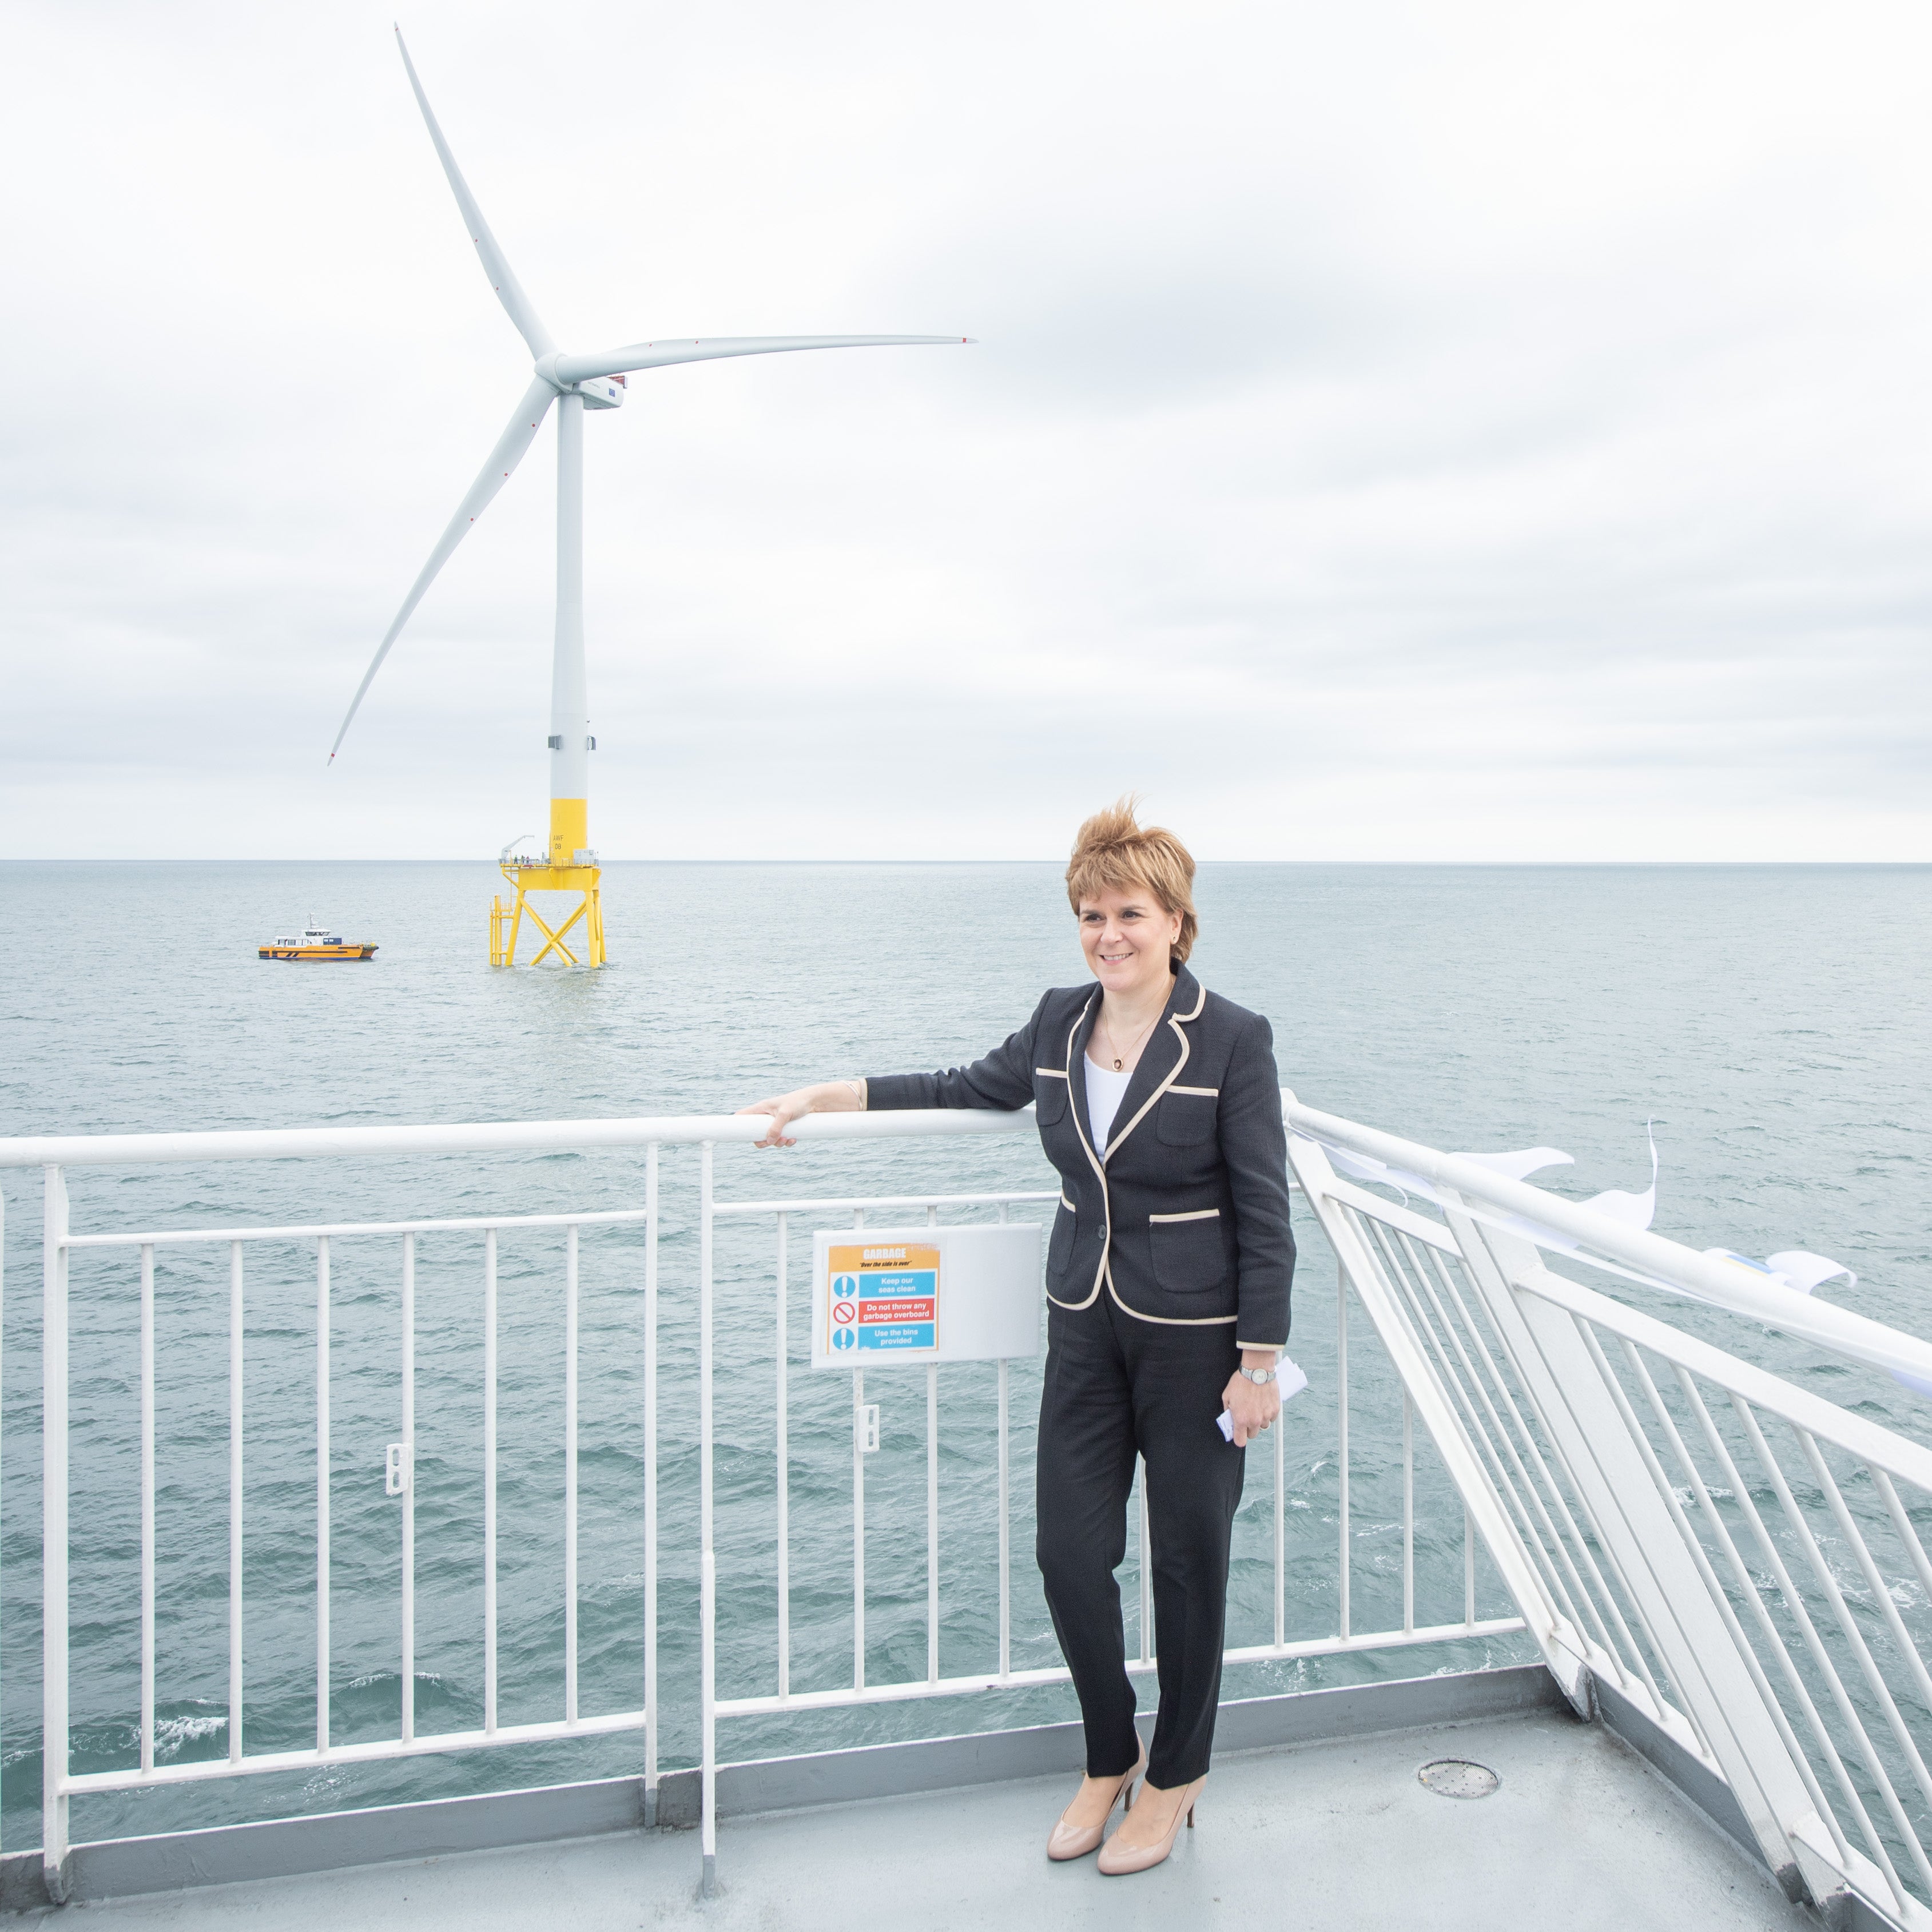 First Minister Nicola Sturgeon was attending the launch of a centre designed to help develop floating offshore wind farms (Michal Wachucik/PA)